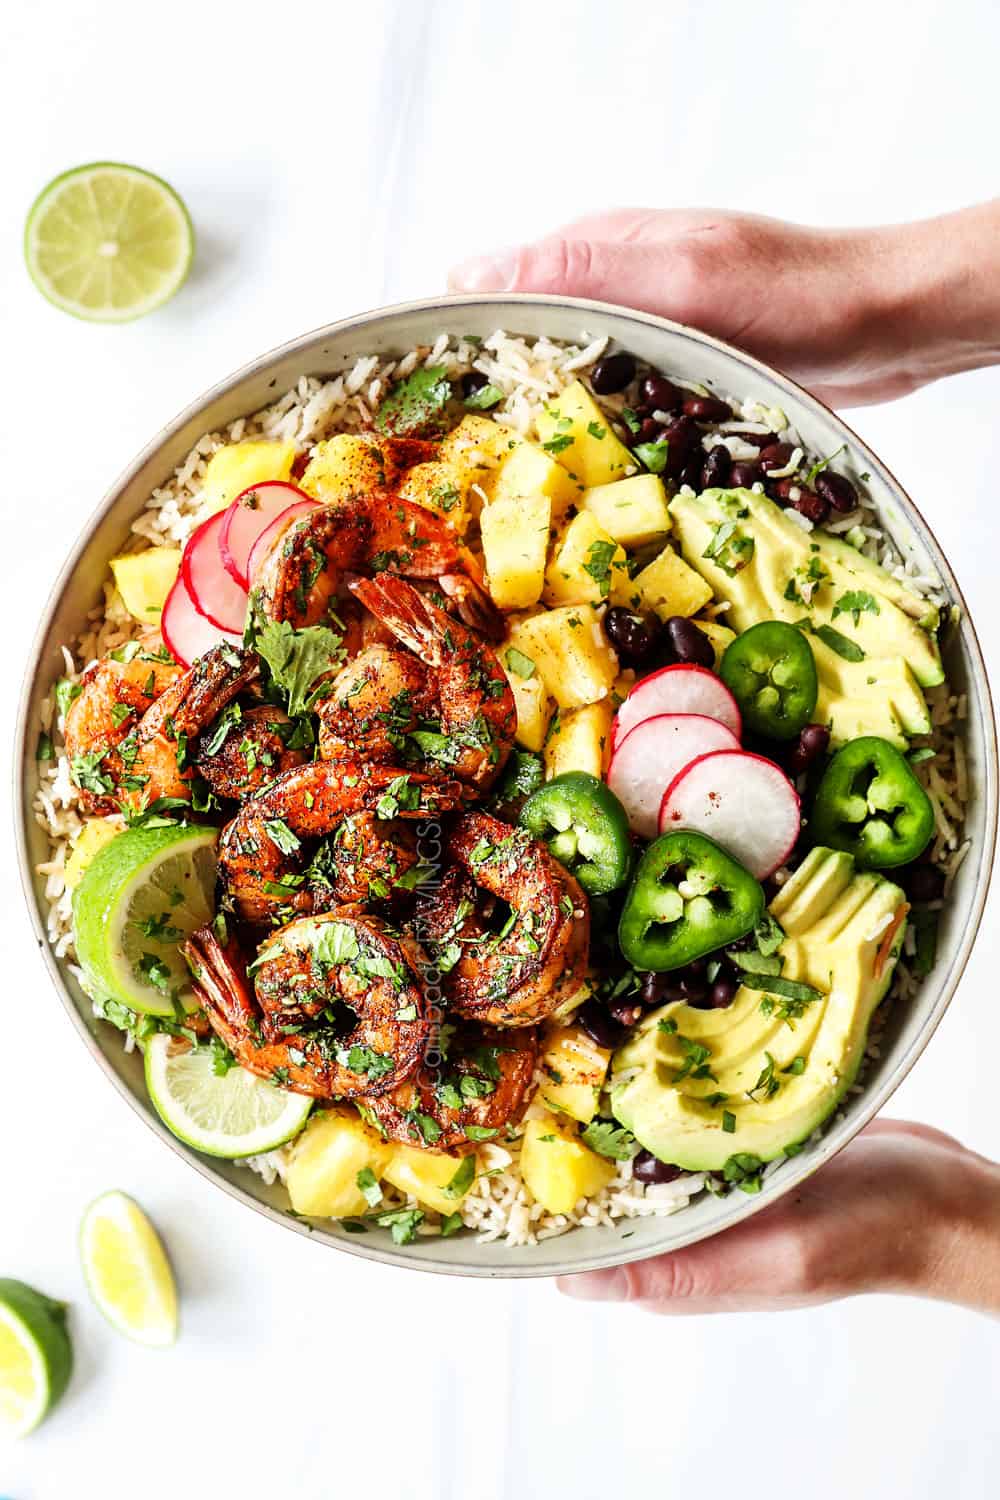 top view showing how to serve cilantro lime shrimp by adding to a bowl with rice, avocado and black beans